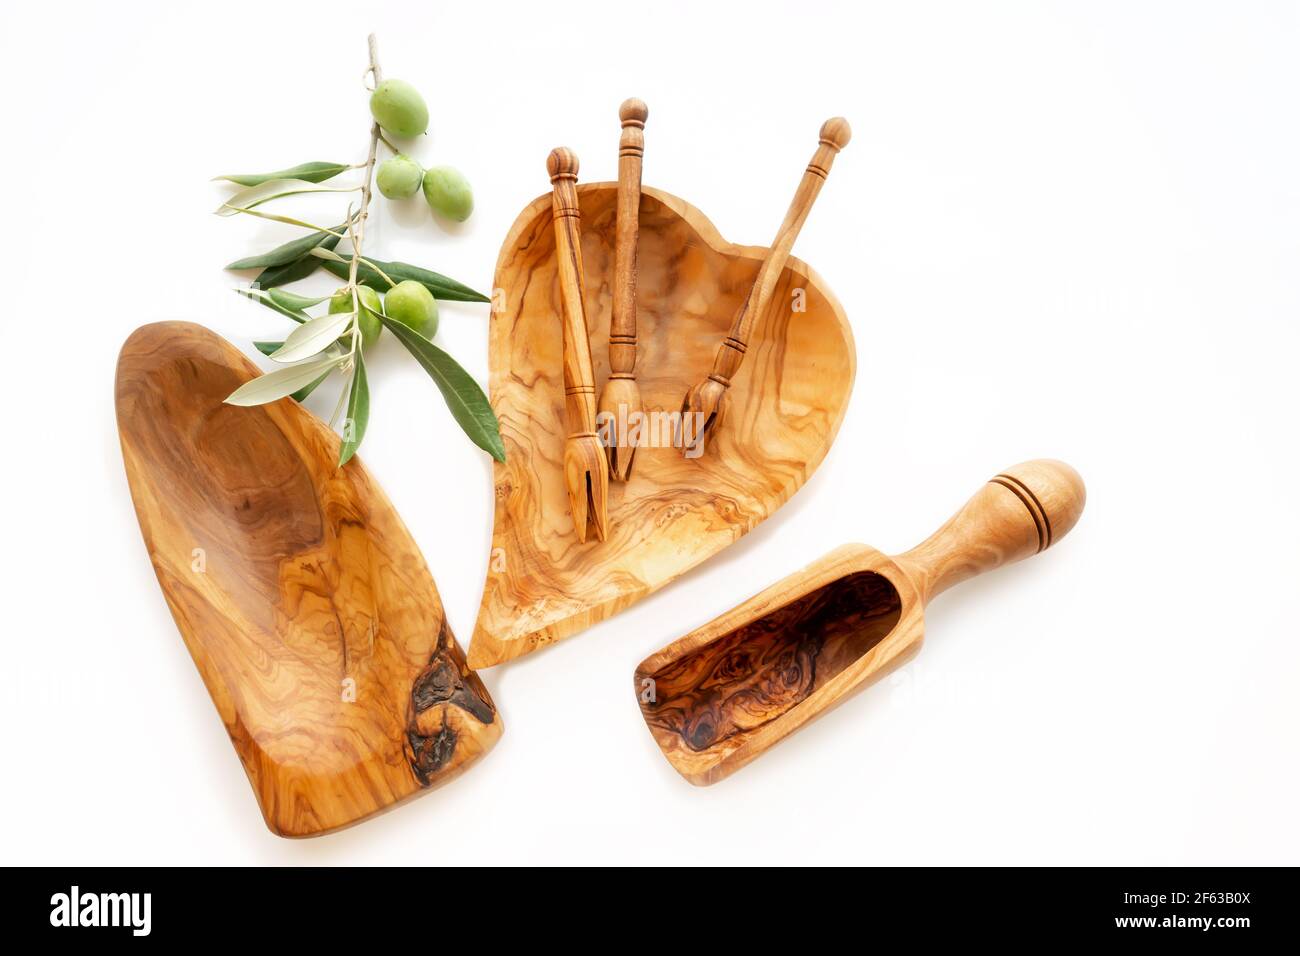 dishes made of olive wood. Eco-friendly choice and friendly nature. The concept of a world without plastic and a clean planet. Wooden dishes and a hea Stock Photo